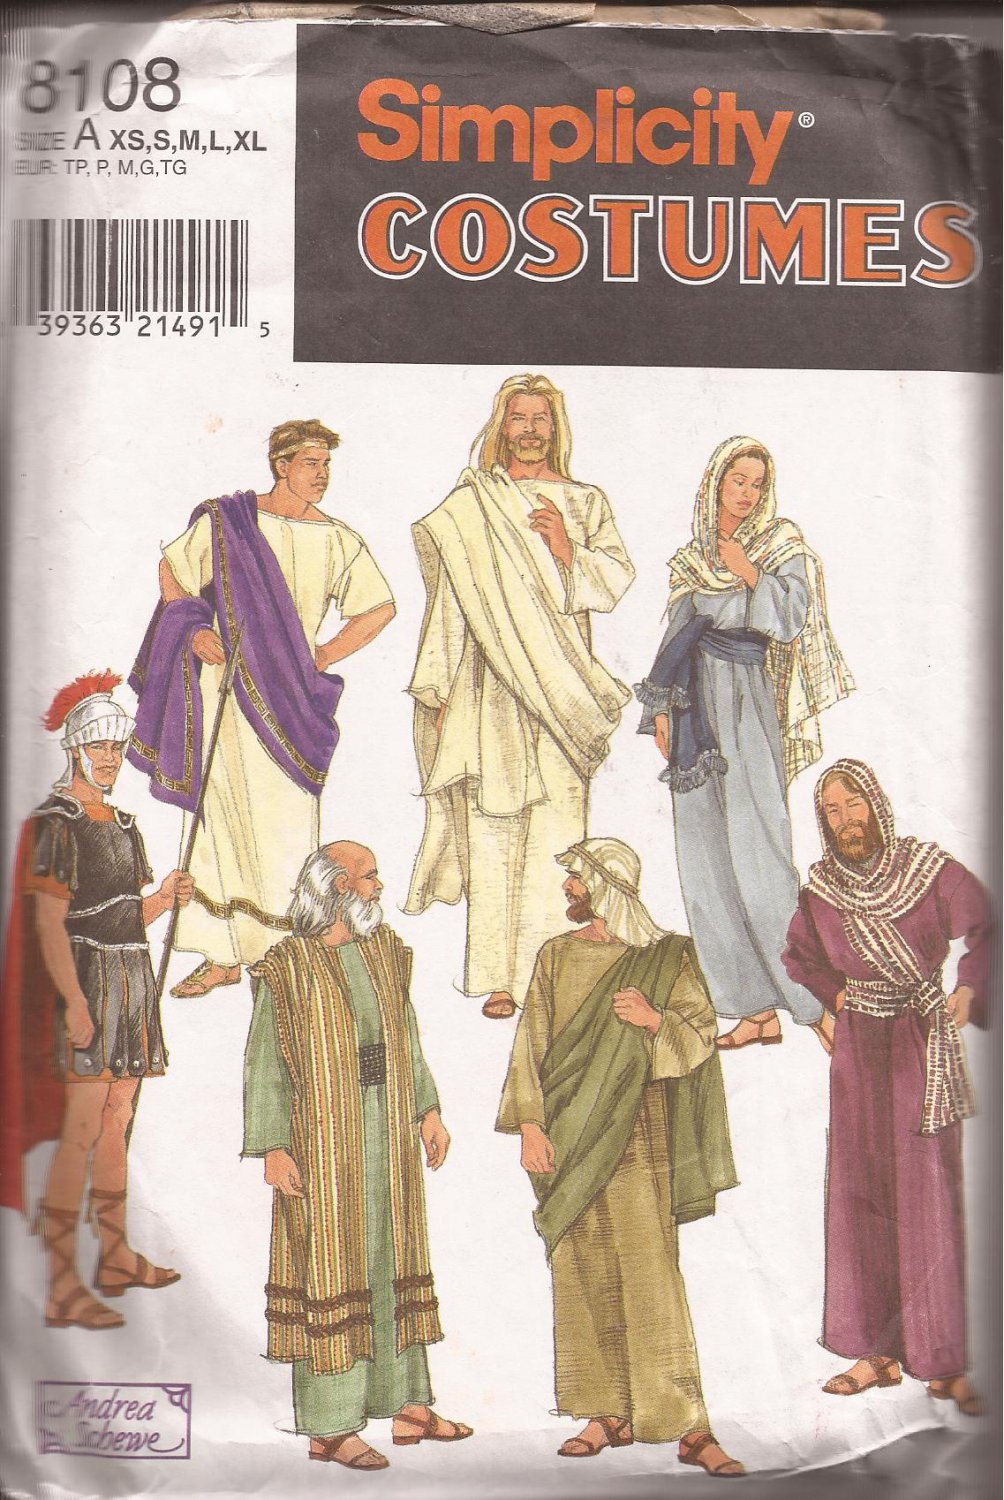 Simplicity 8108 Adult Easter Passion Play Costumes Toga Armor Roman Jesus Pattern Size Xs S M L Xl